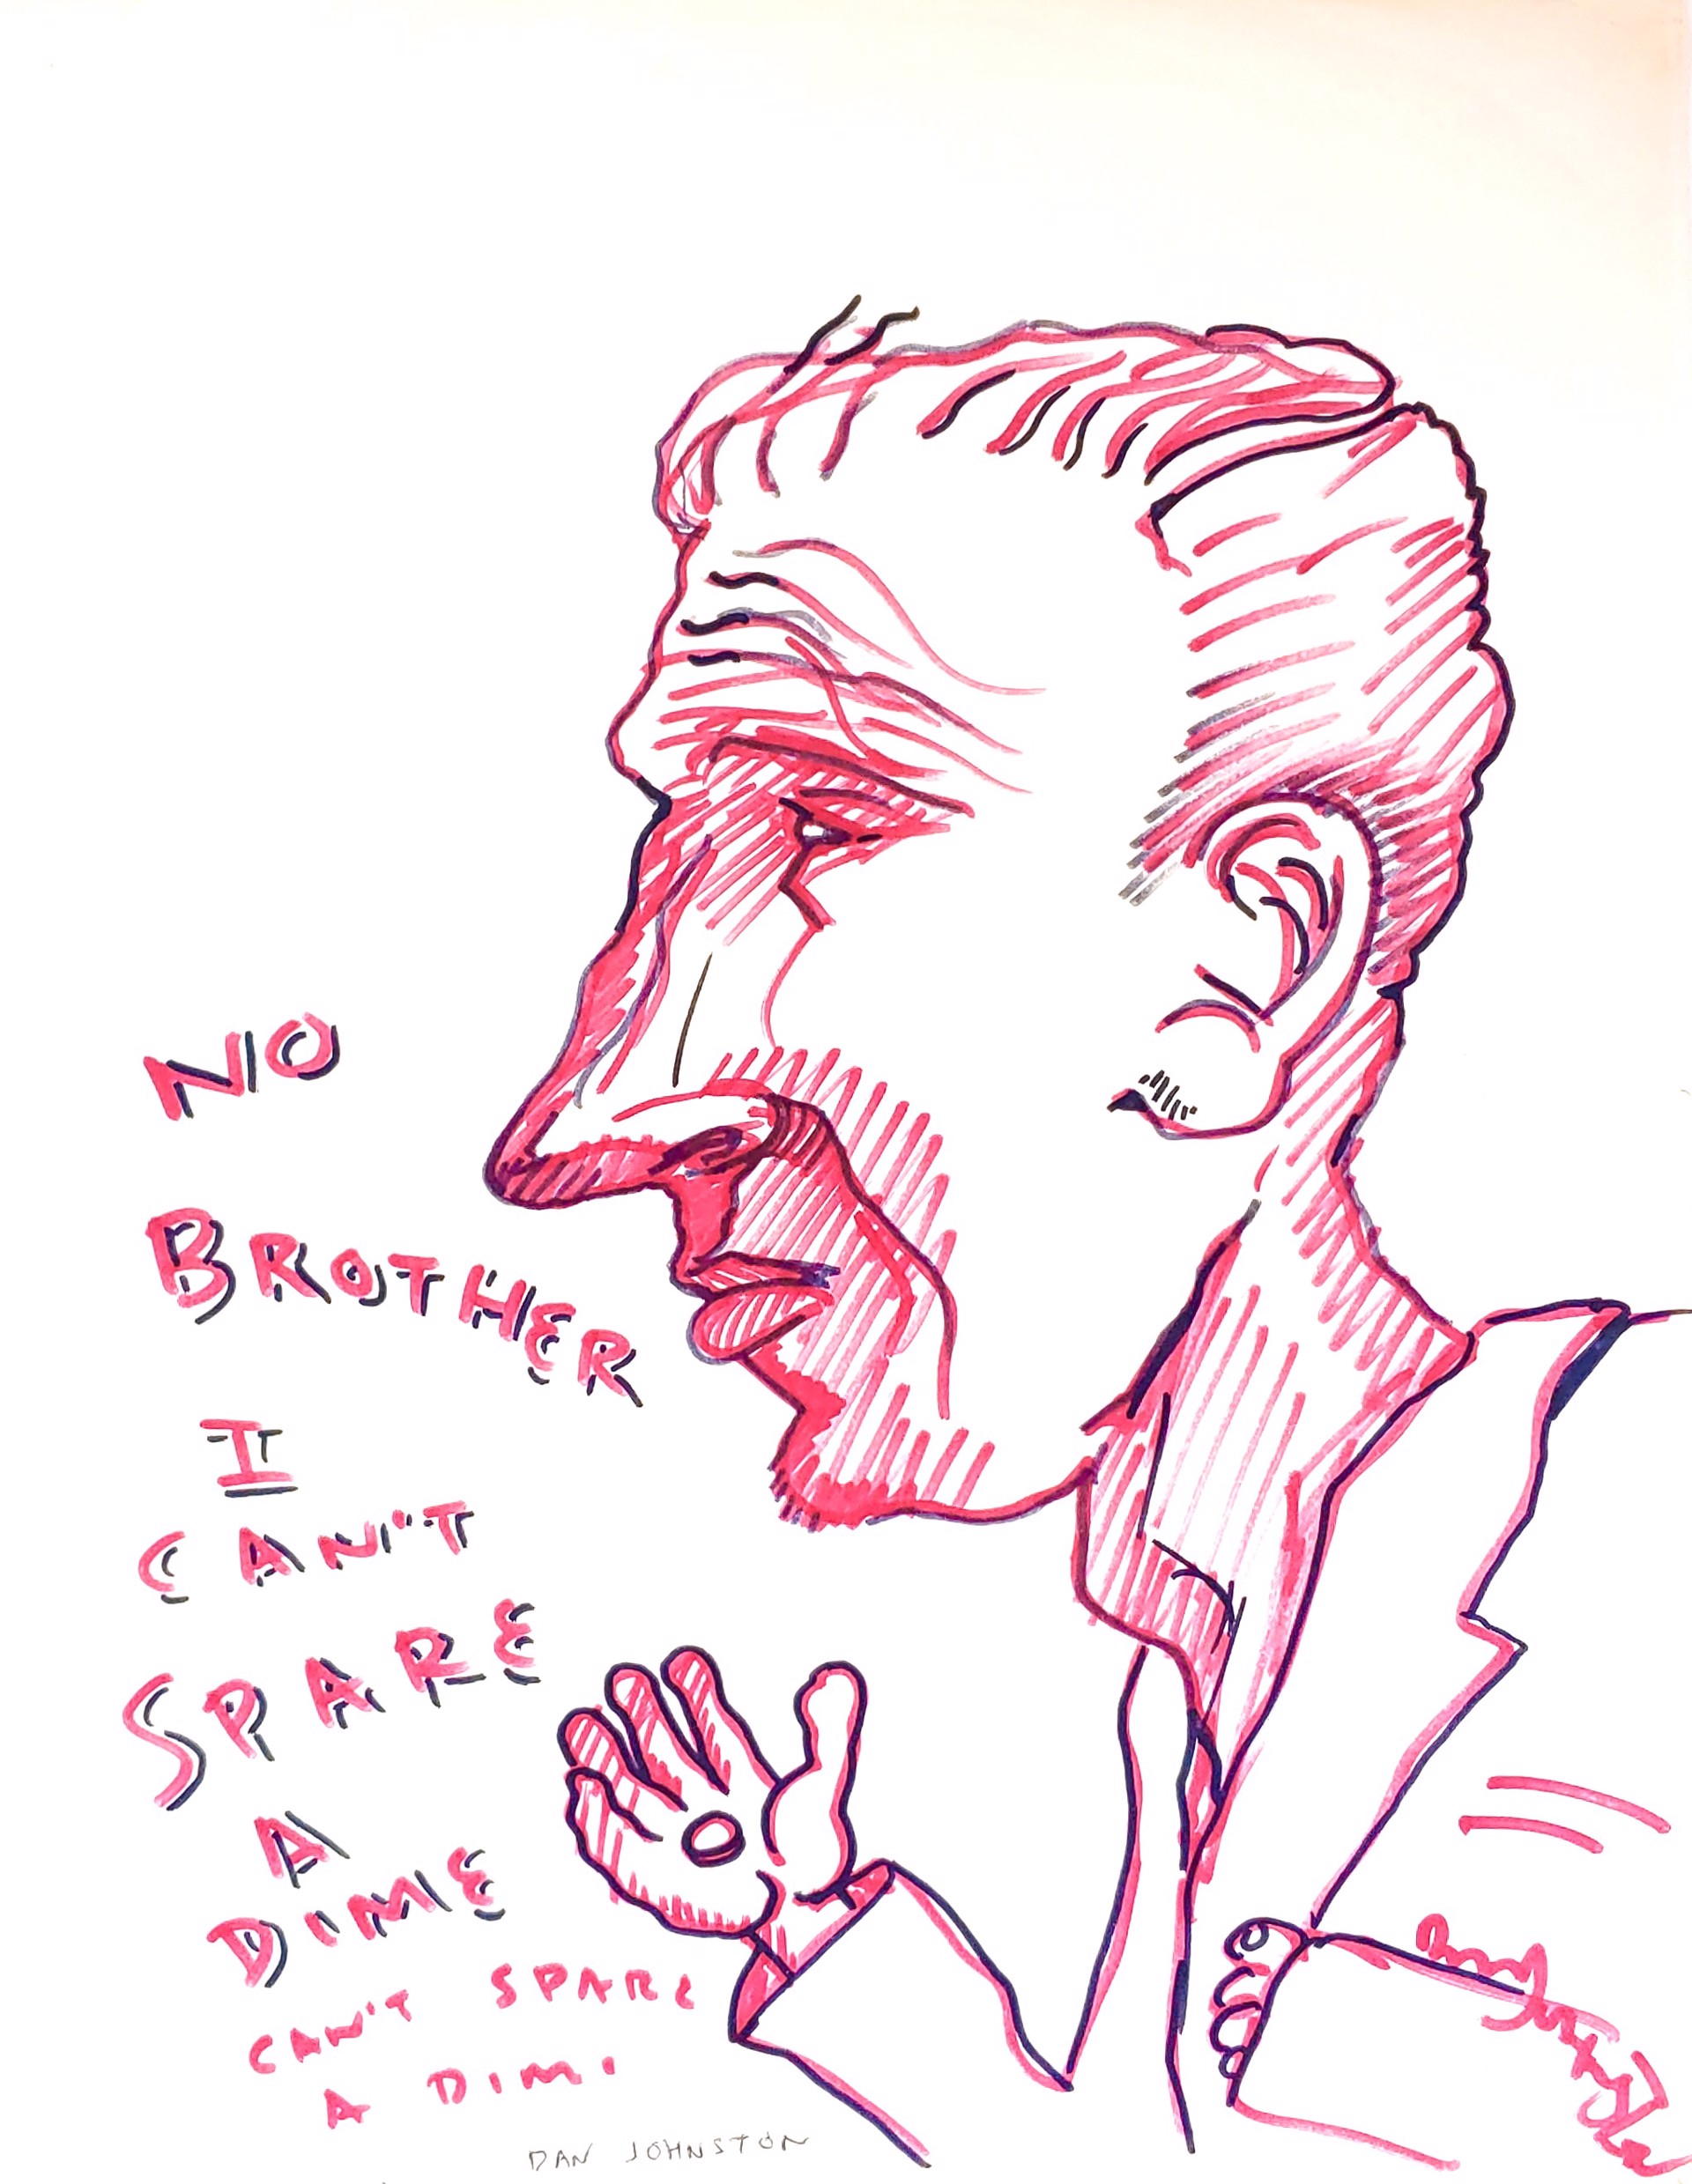 No Brother by Daniel Johnston